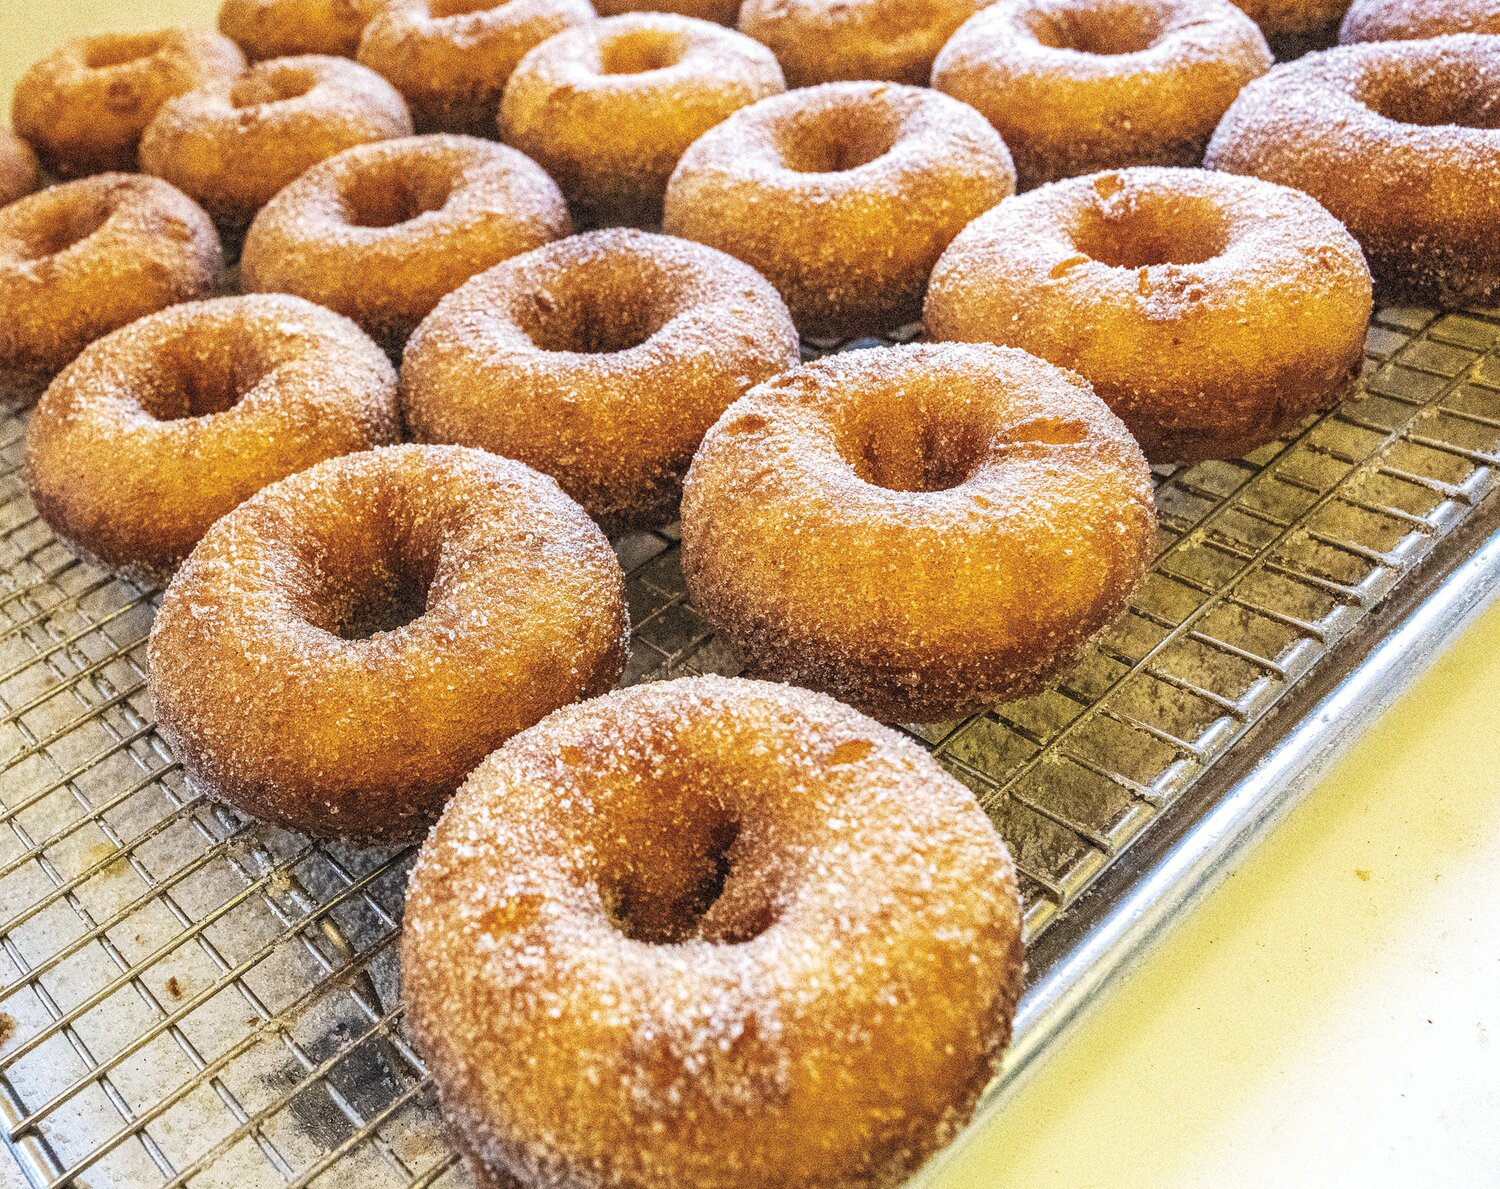 Cider Doughnuts are a favorite at Solebury Orchards, a popular destination for apple picking and family picnics in the fall.